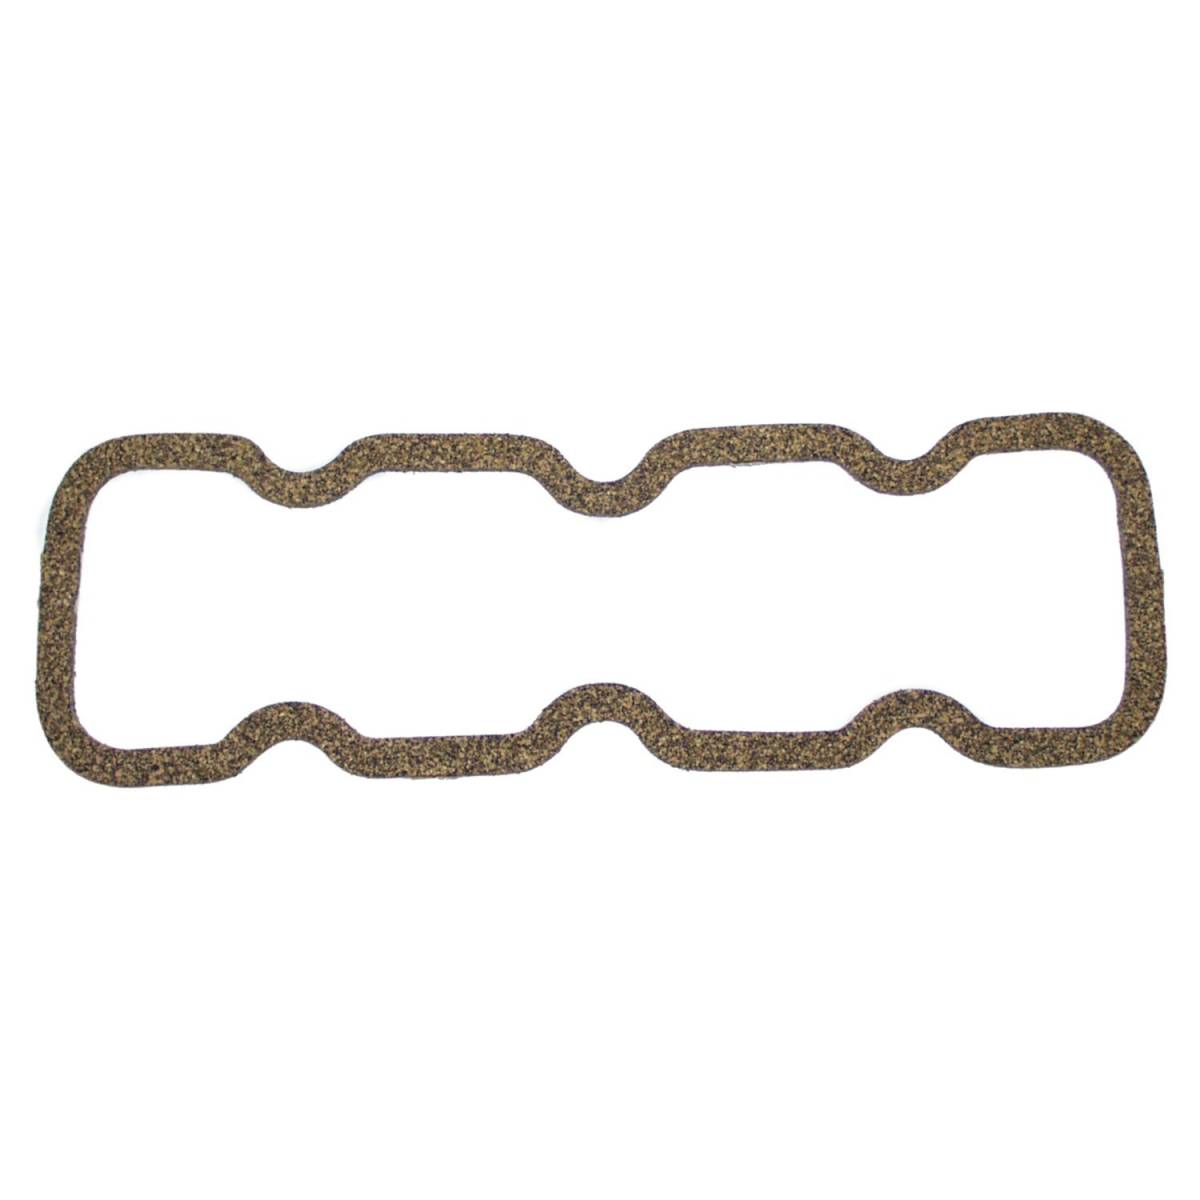 Valve Cover Gasket for Misc. 1952-1971 Jeep Vehicles w/ 4-134 Engine